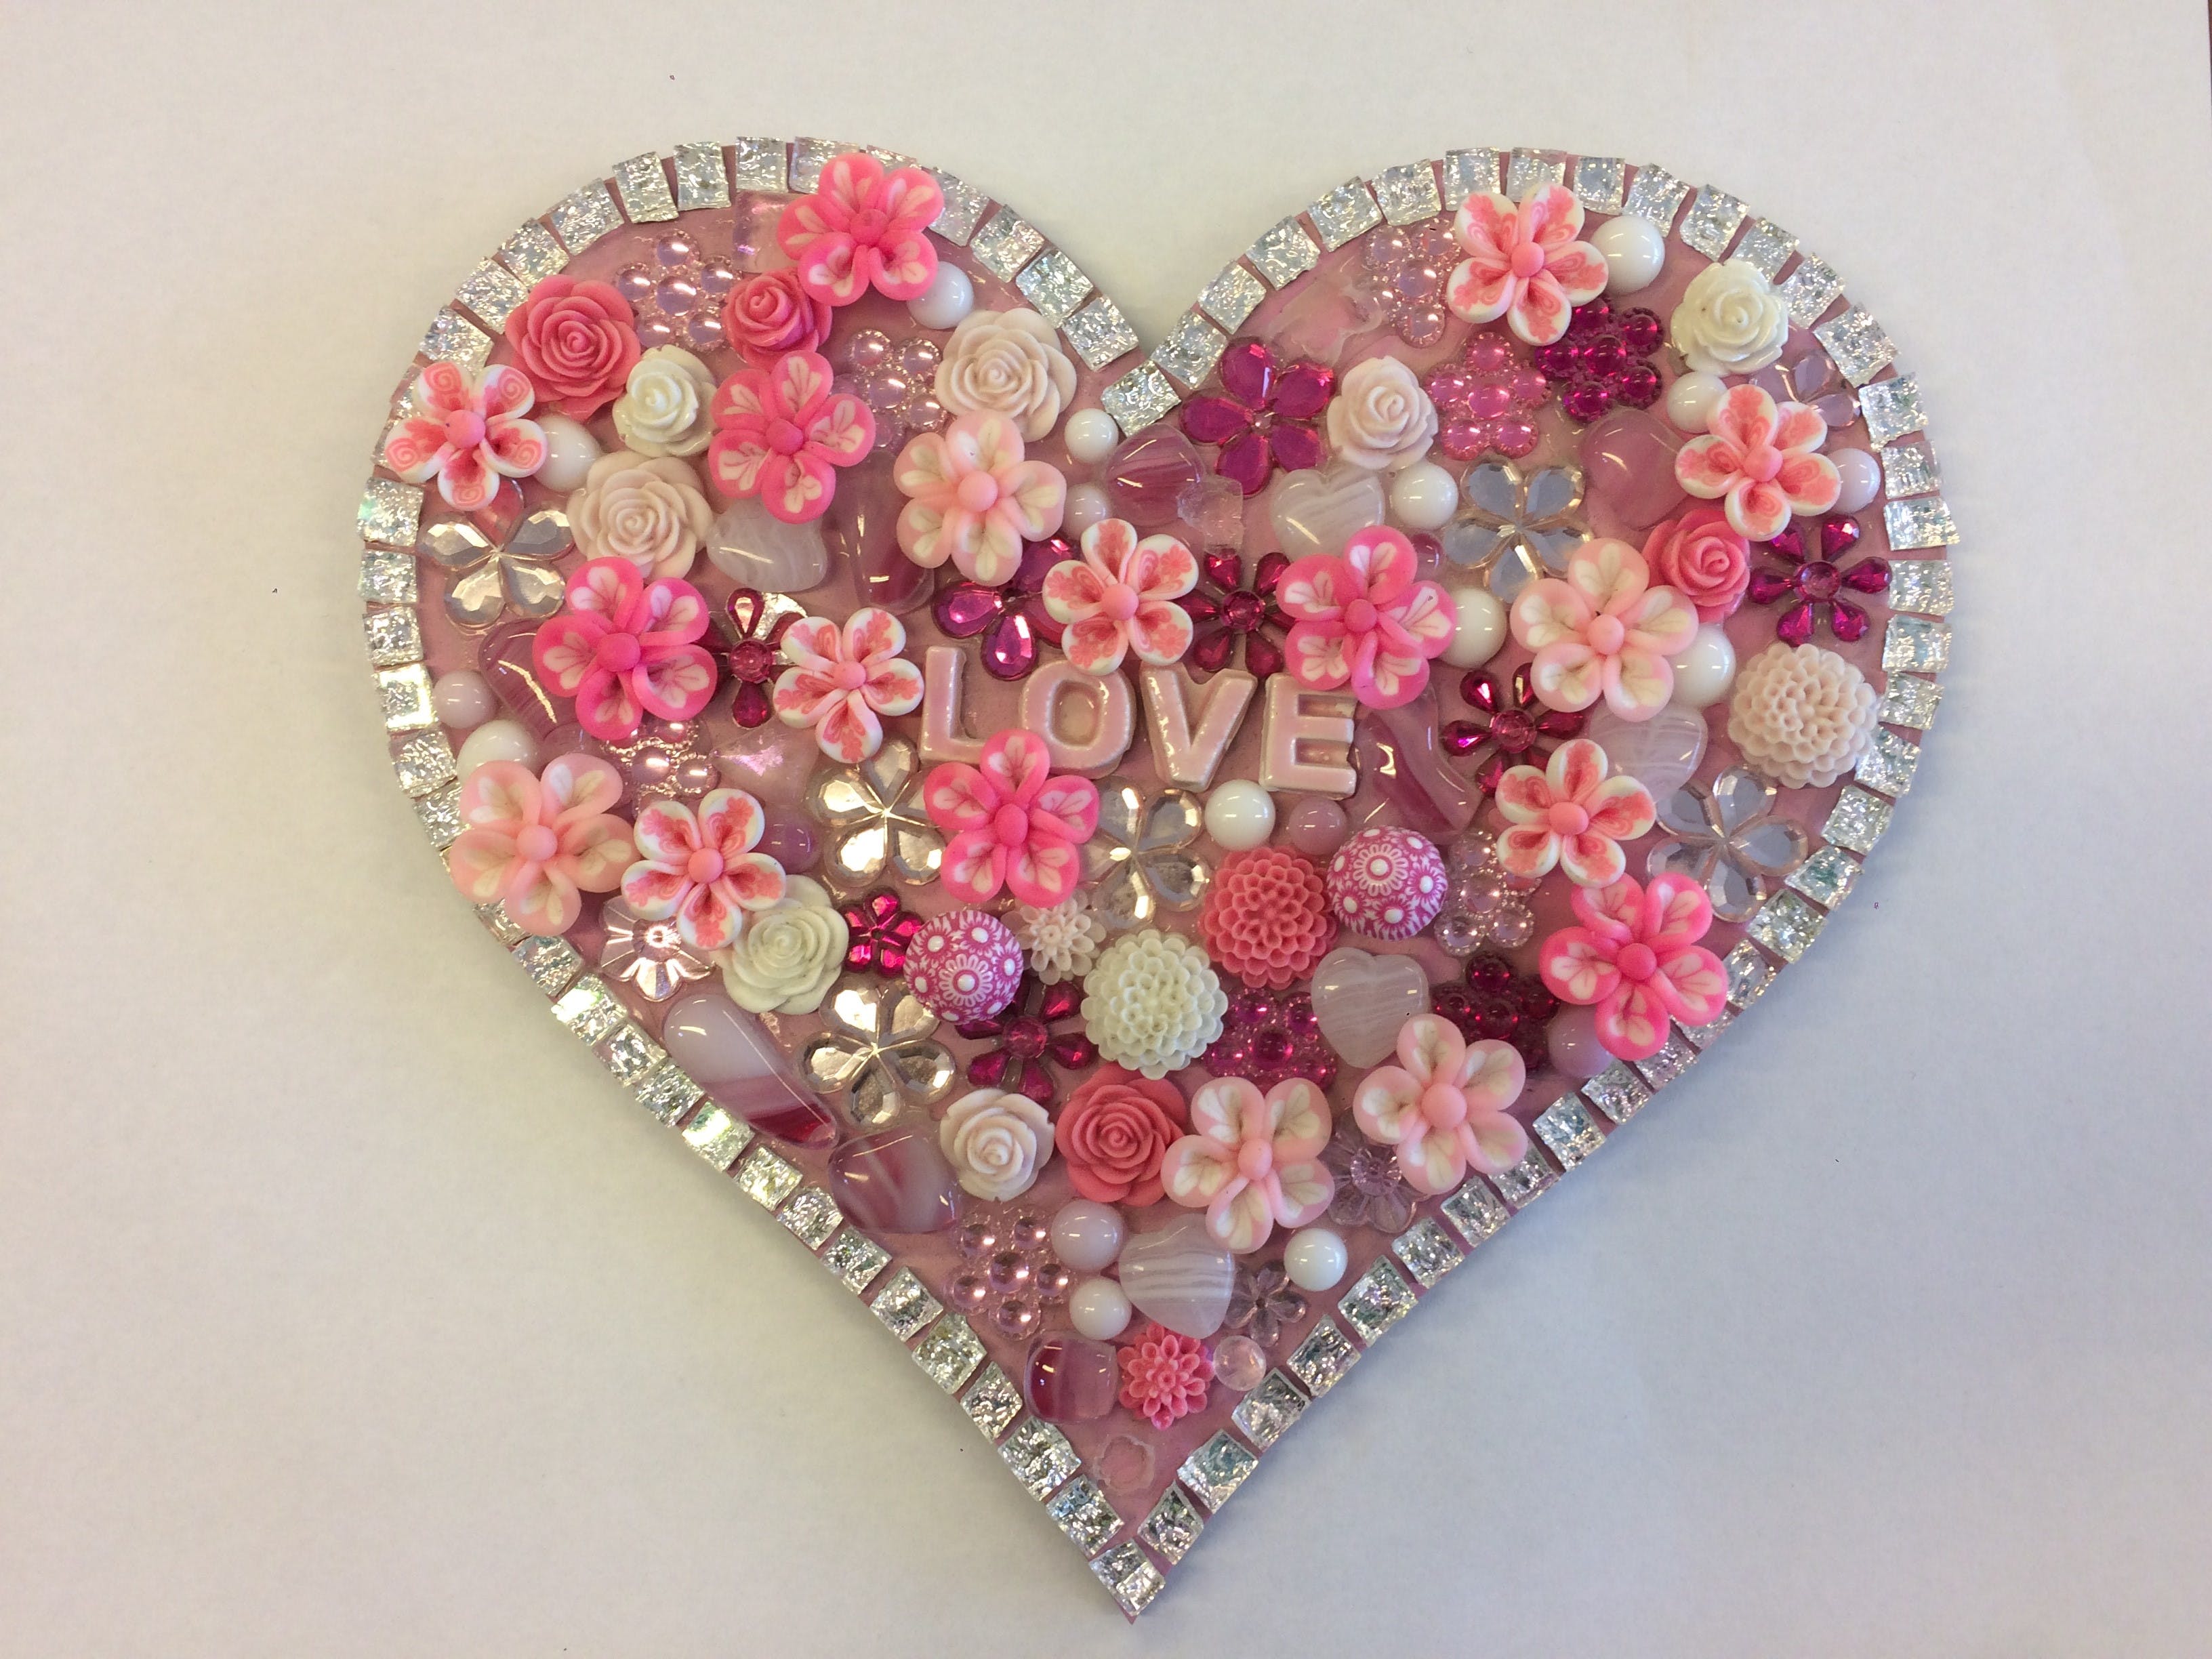 Flowers and Bling Mosaic Class for Kids - Accommodation Kalgoorlie